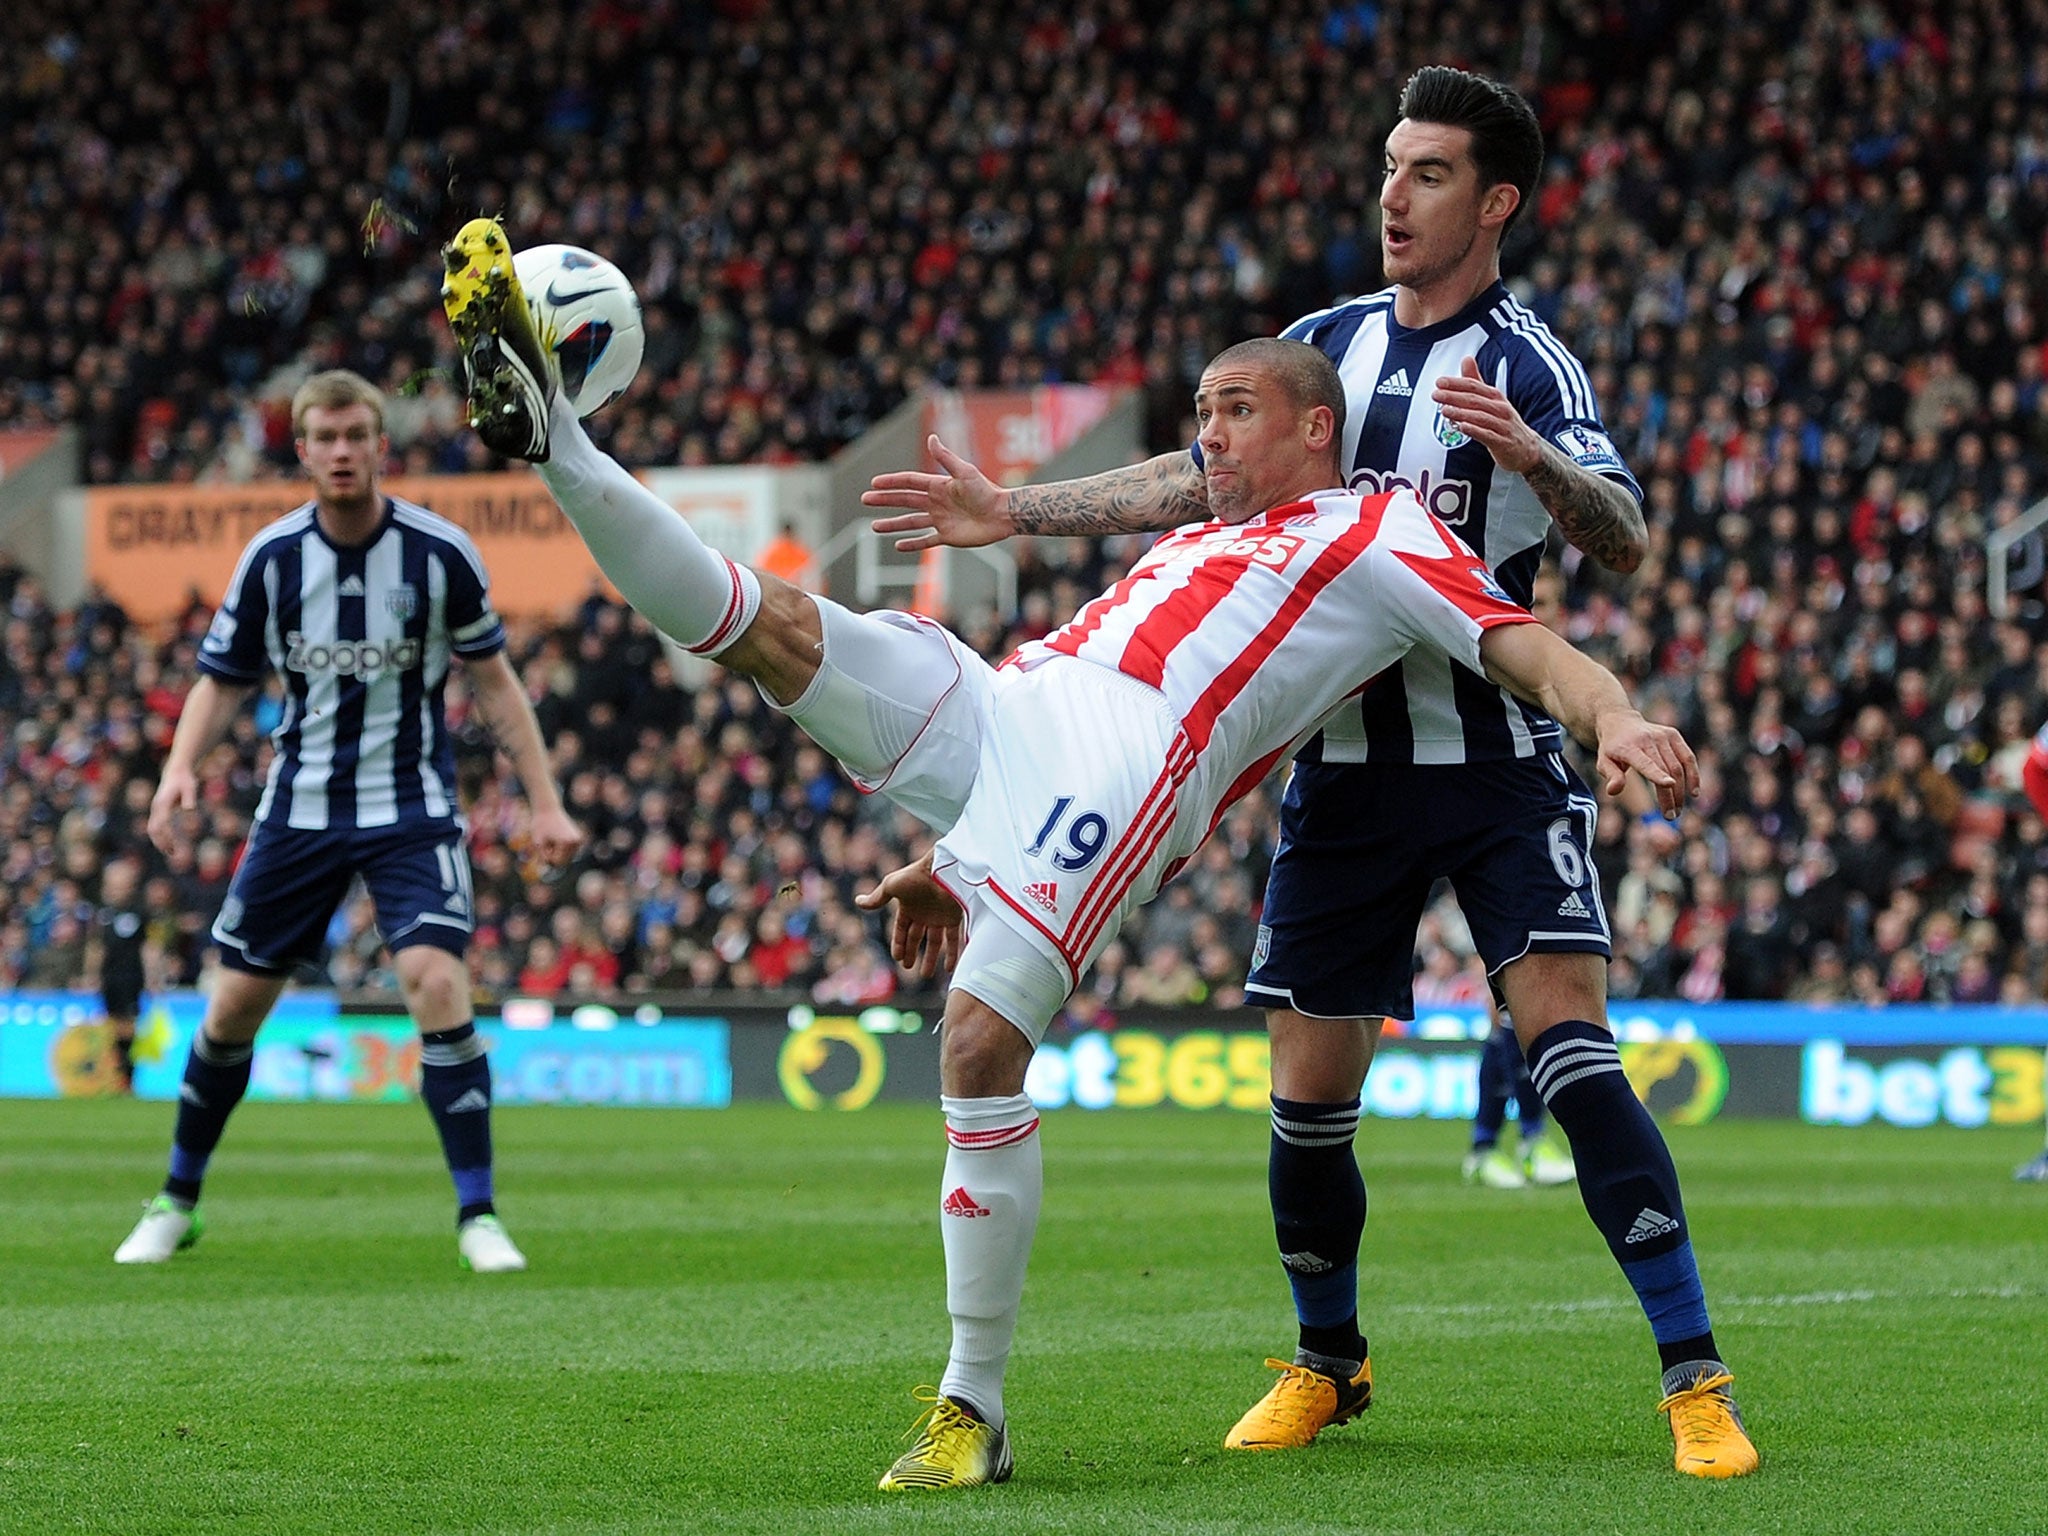 Jonathan Walters of Stoke City in action with Liam Ridgewell of West Bromwich Albion